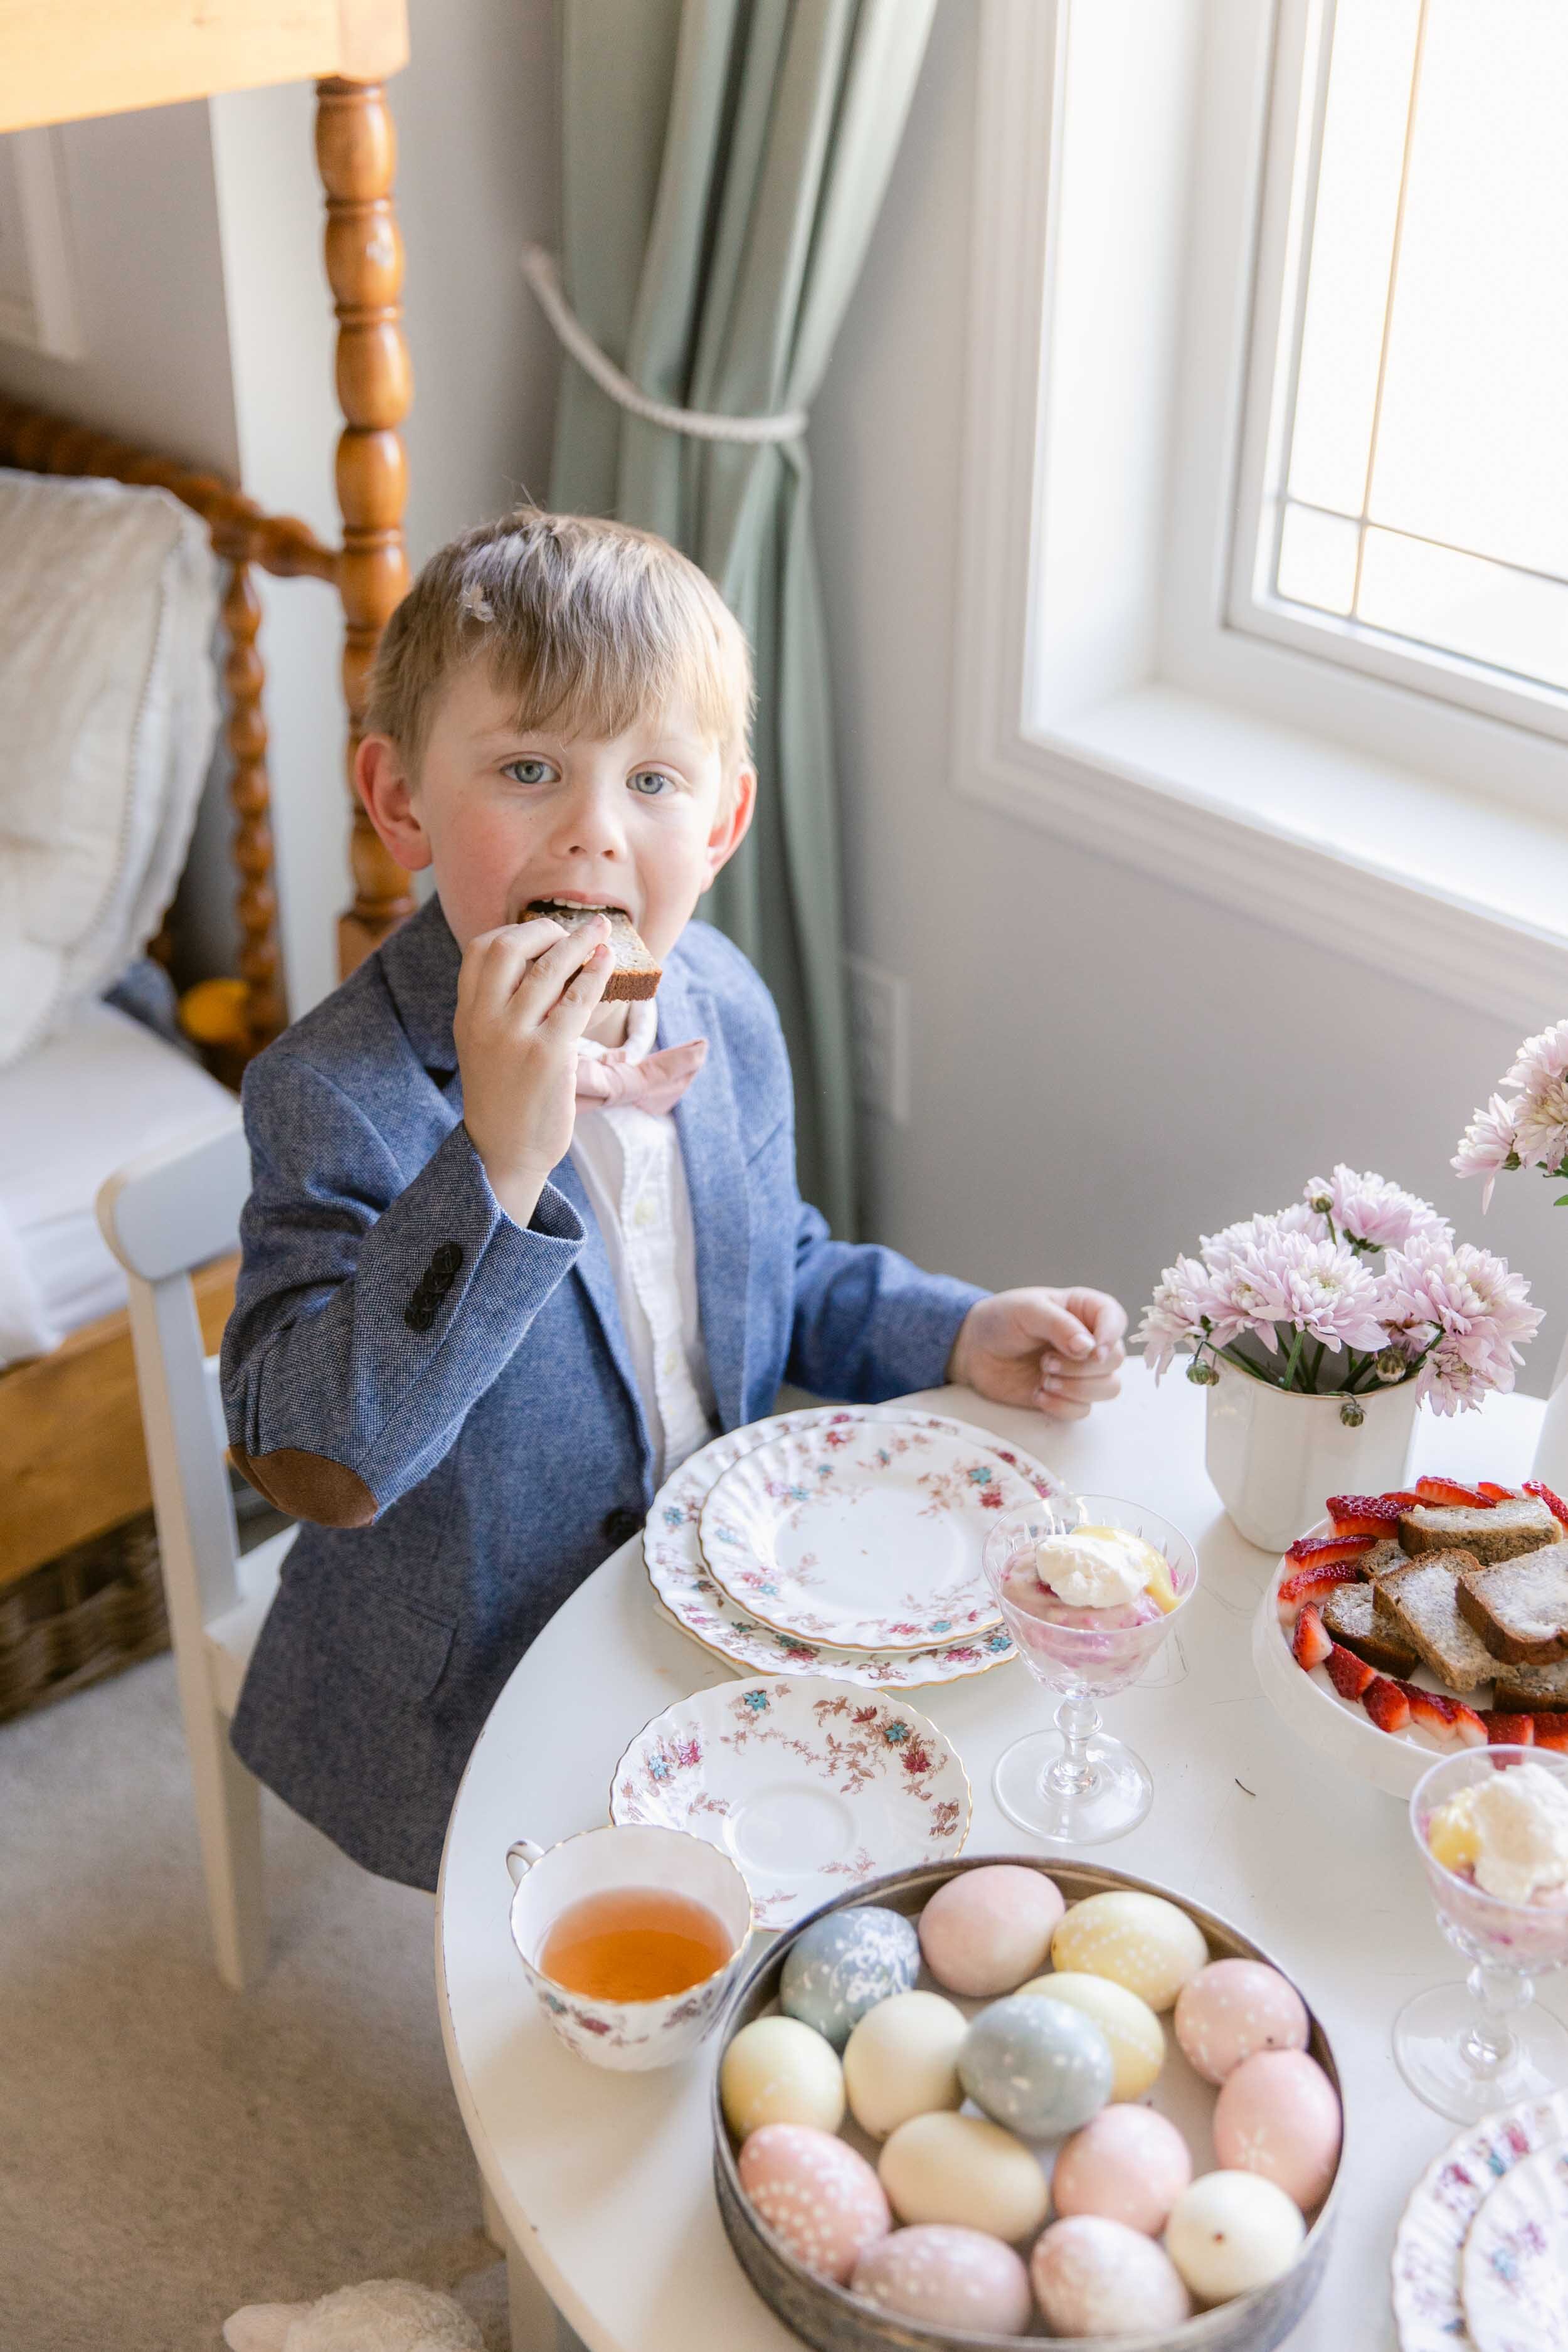 How to Connect with children, mother's connection, easter tea party, calgary motherhood photographer jennie guenard photography